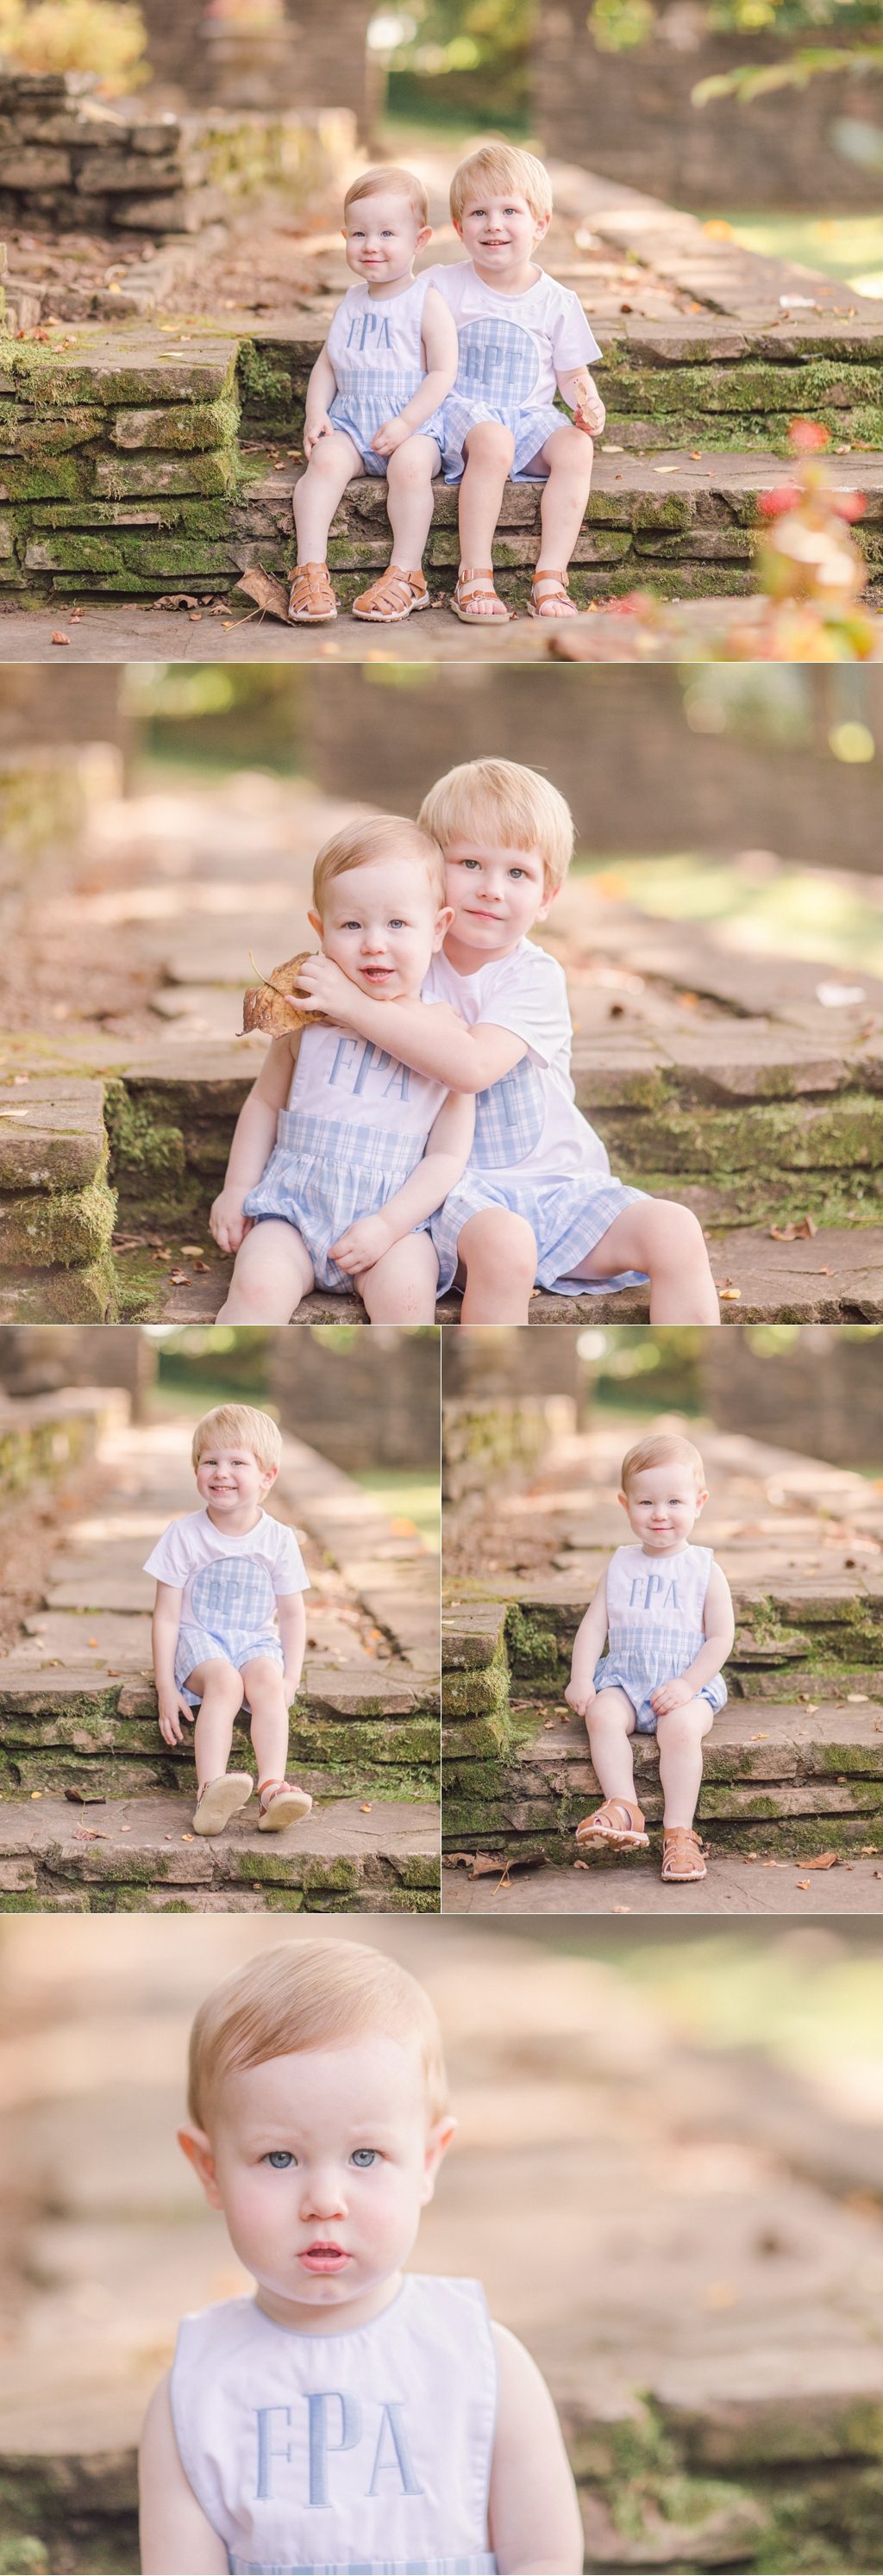 Athens, GA kids family photo session of two brothers.